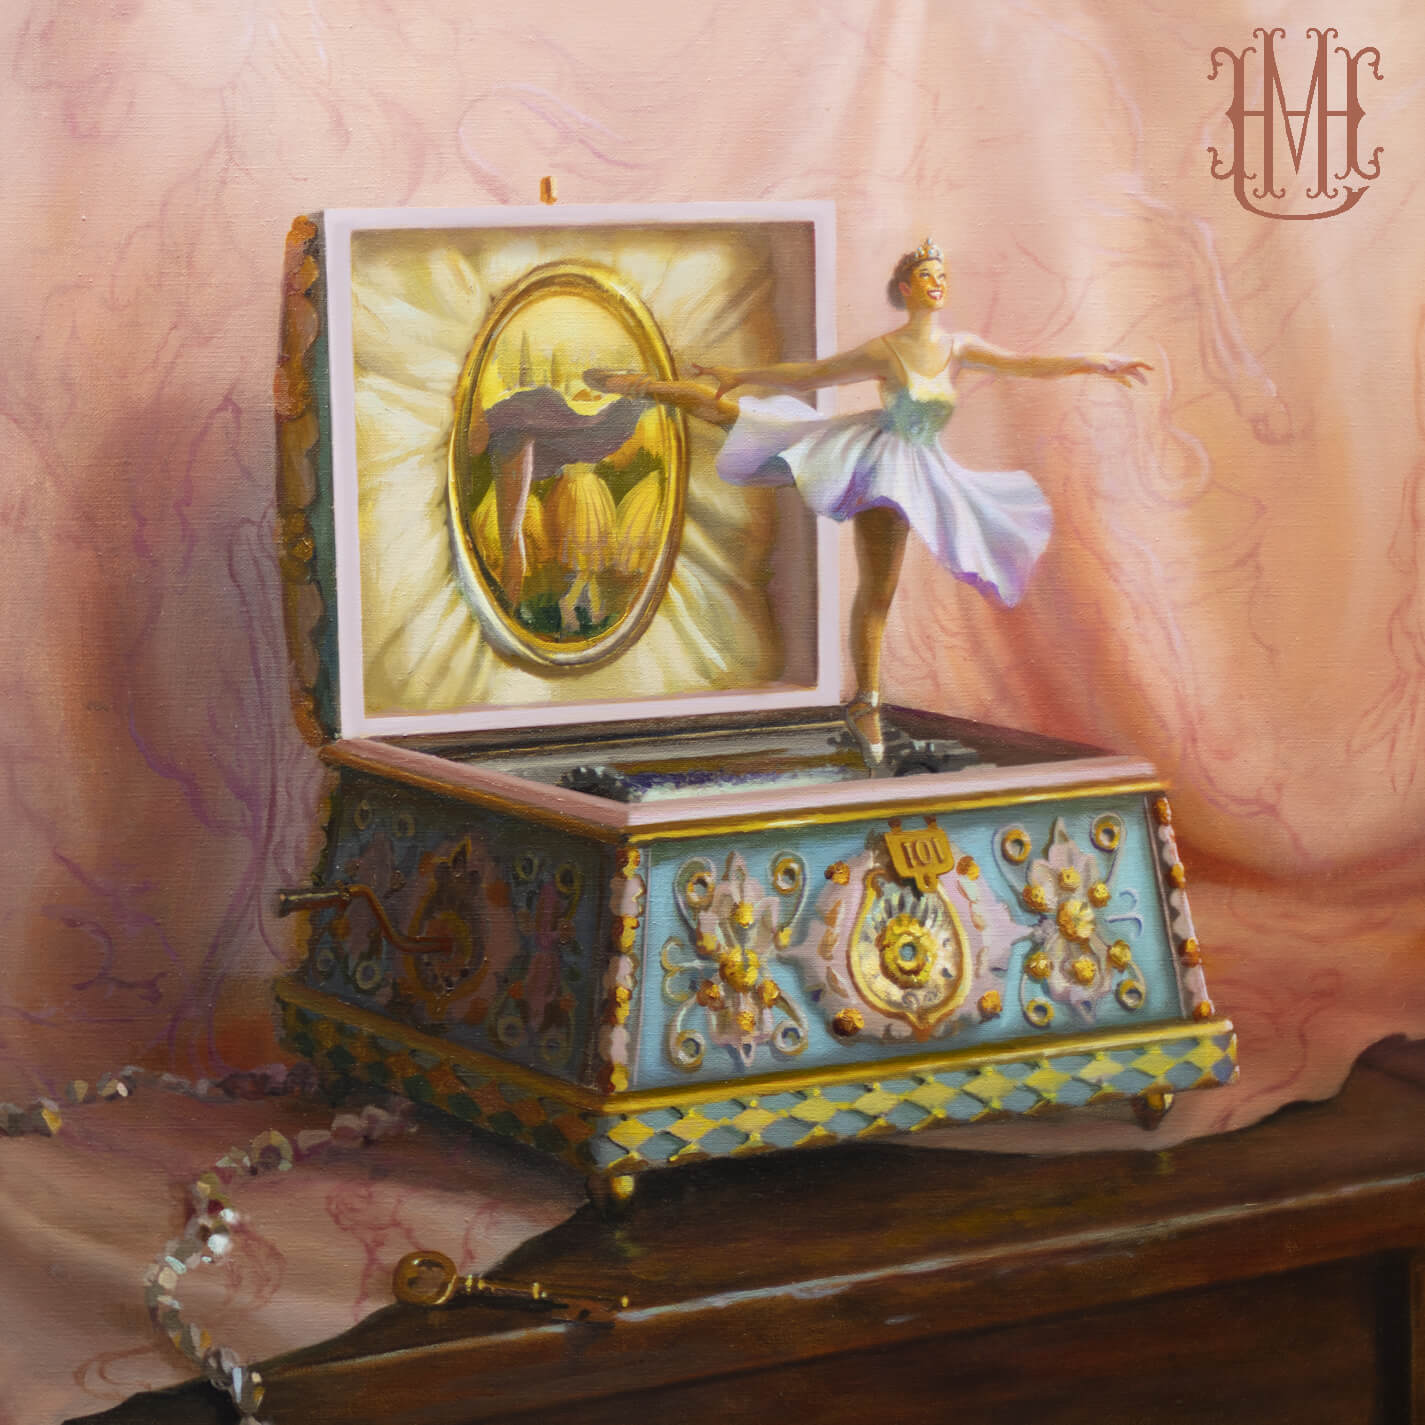 Love, Hate, Music box by Rainbow Kitten Surprise album review by David Saxum for Northern Transmissions